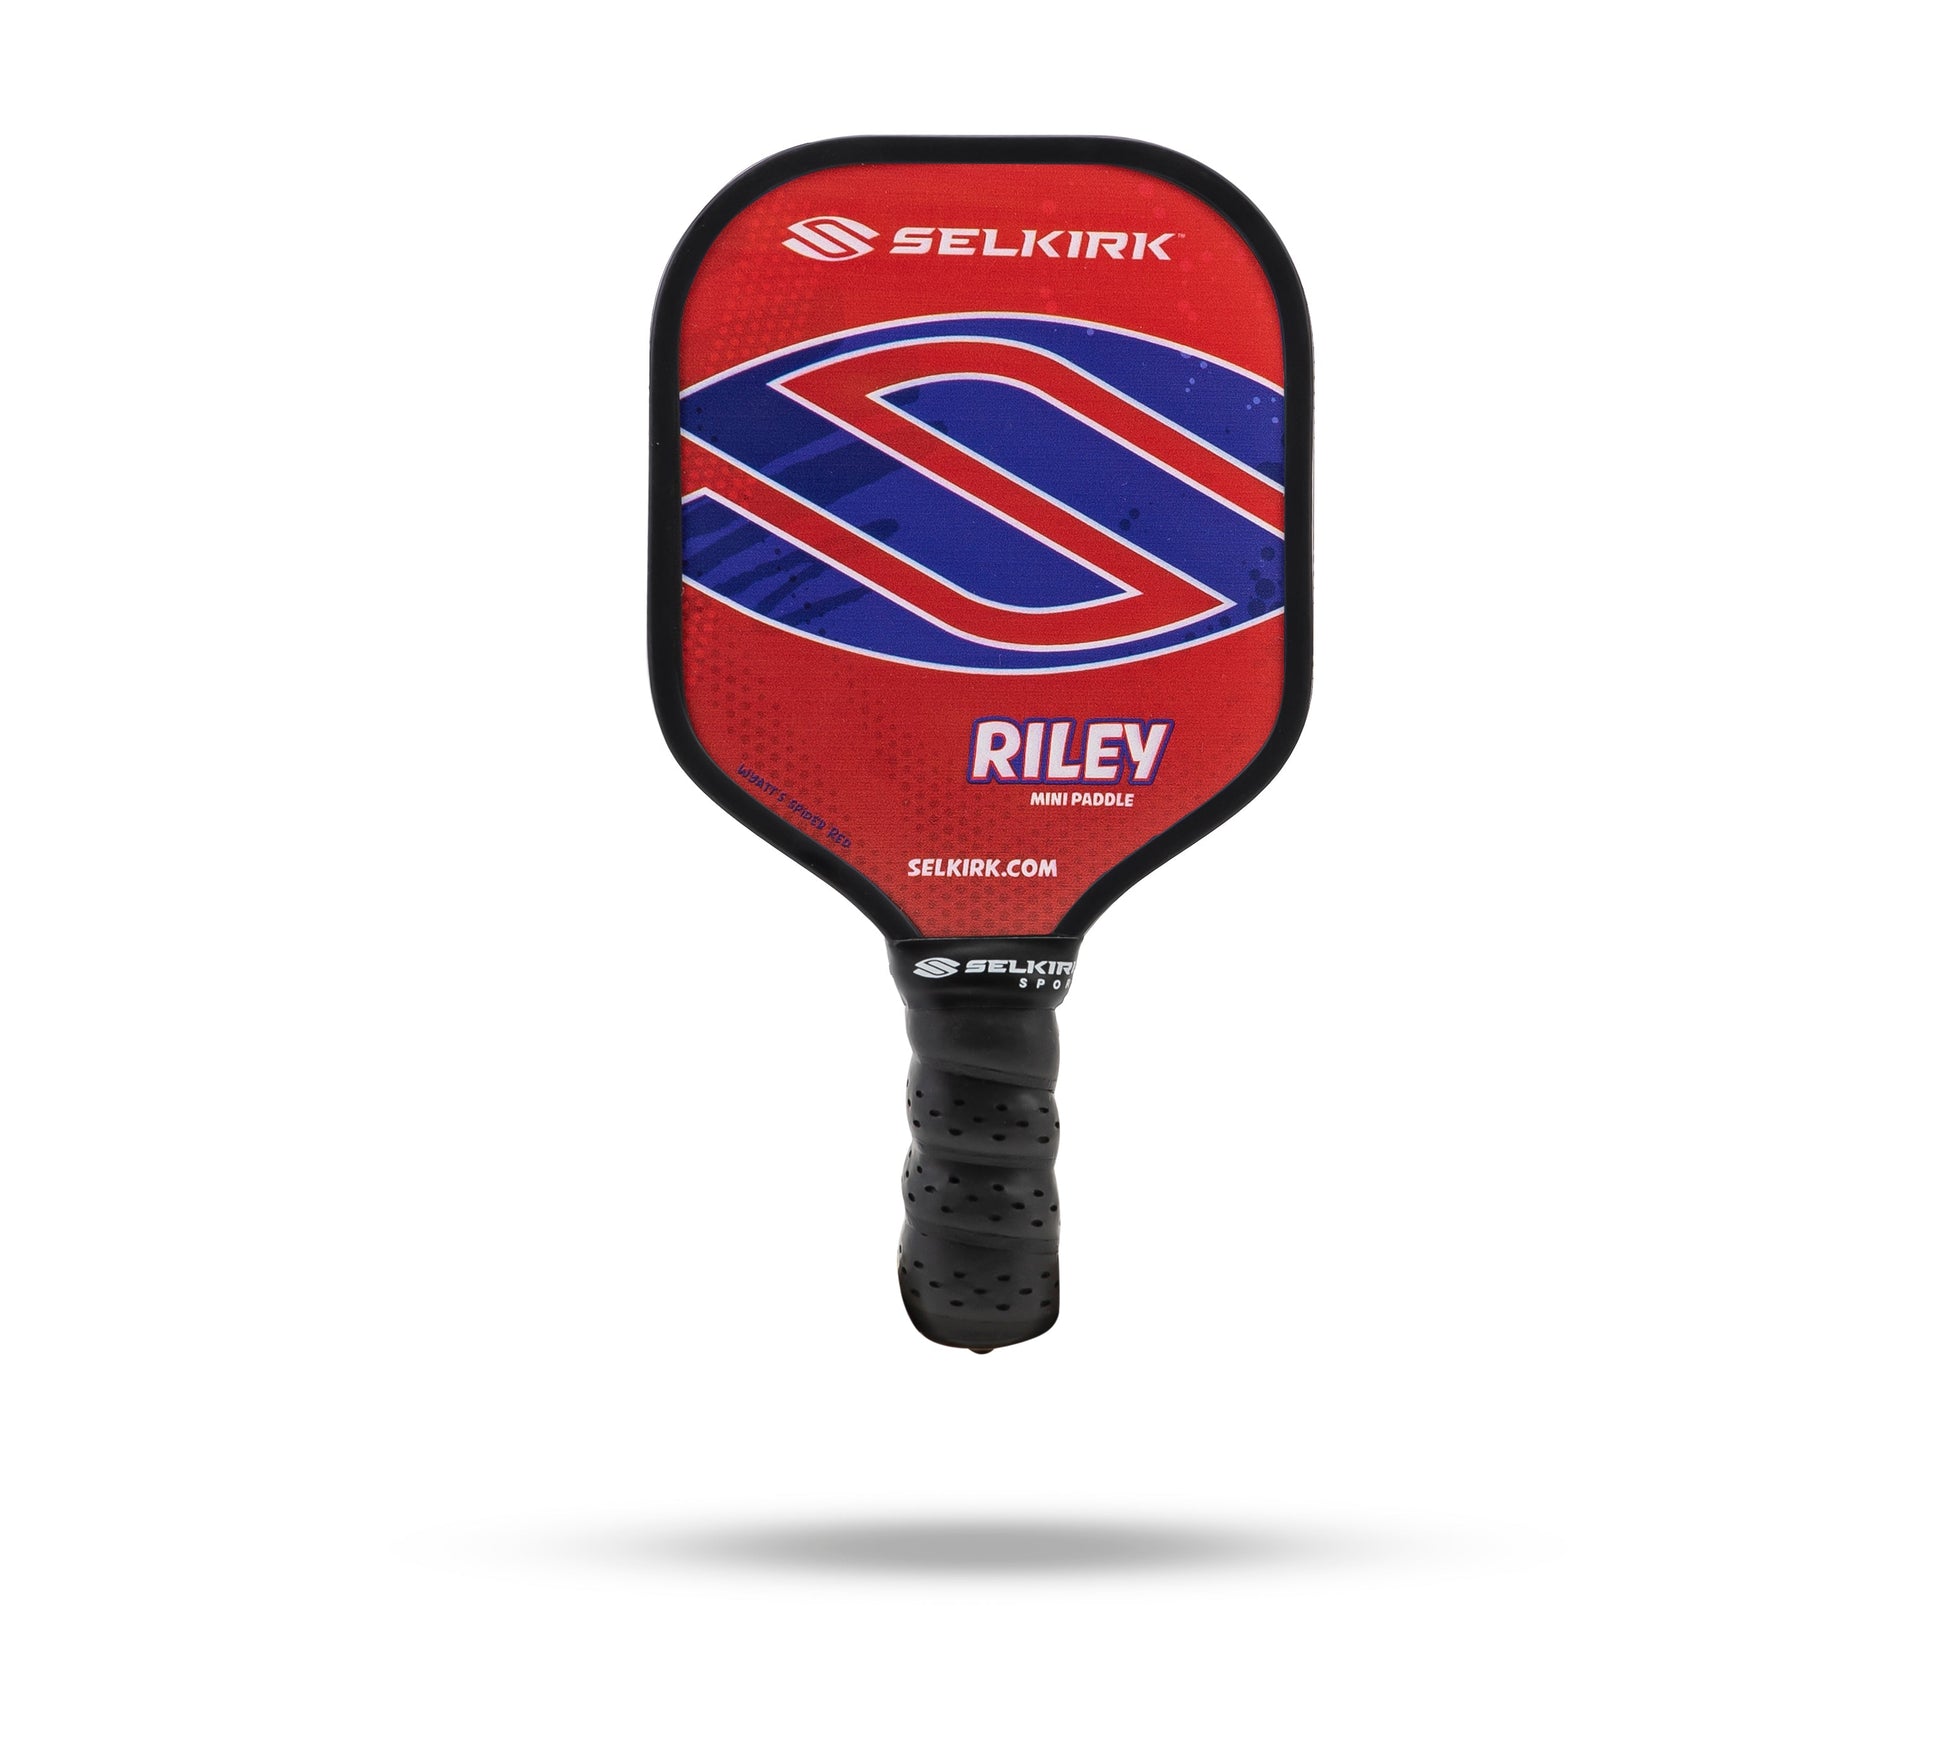 Introducing the Selkirk Riley Mini Pickleball Paddle Collection, featuring a paddle with a vibrant red, blue and white design. This novelty gift offers a fresh look that is sure to impress.